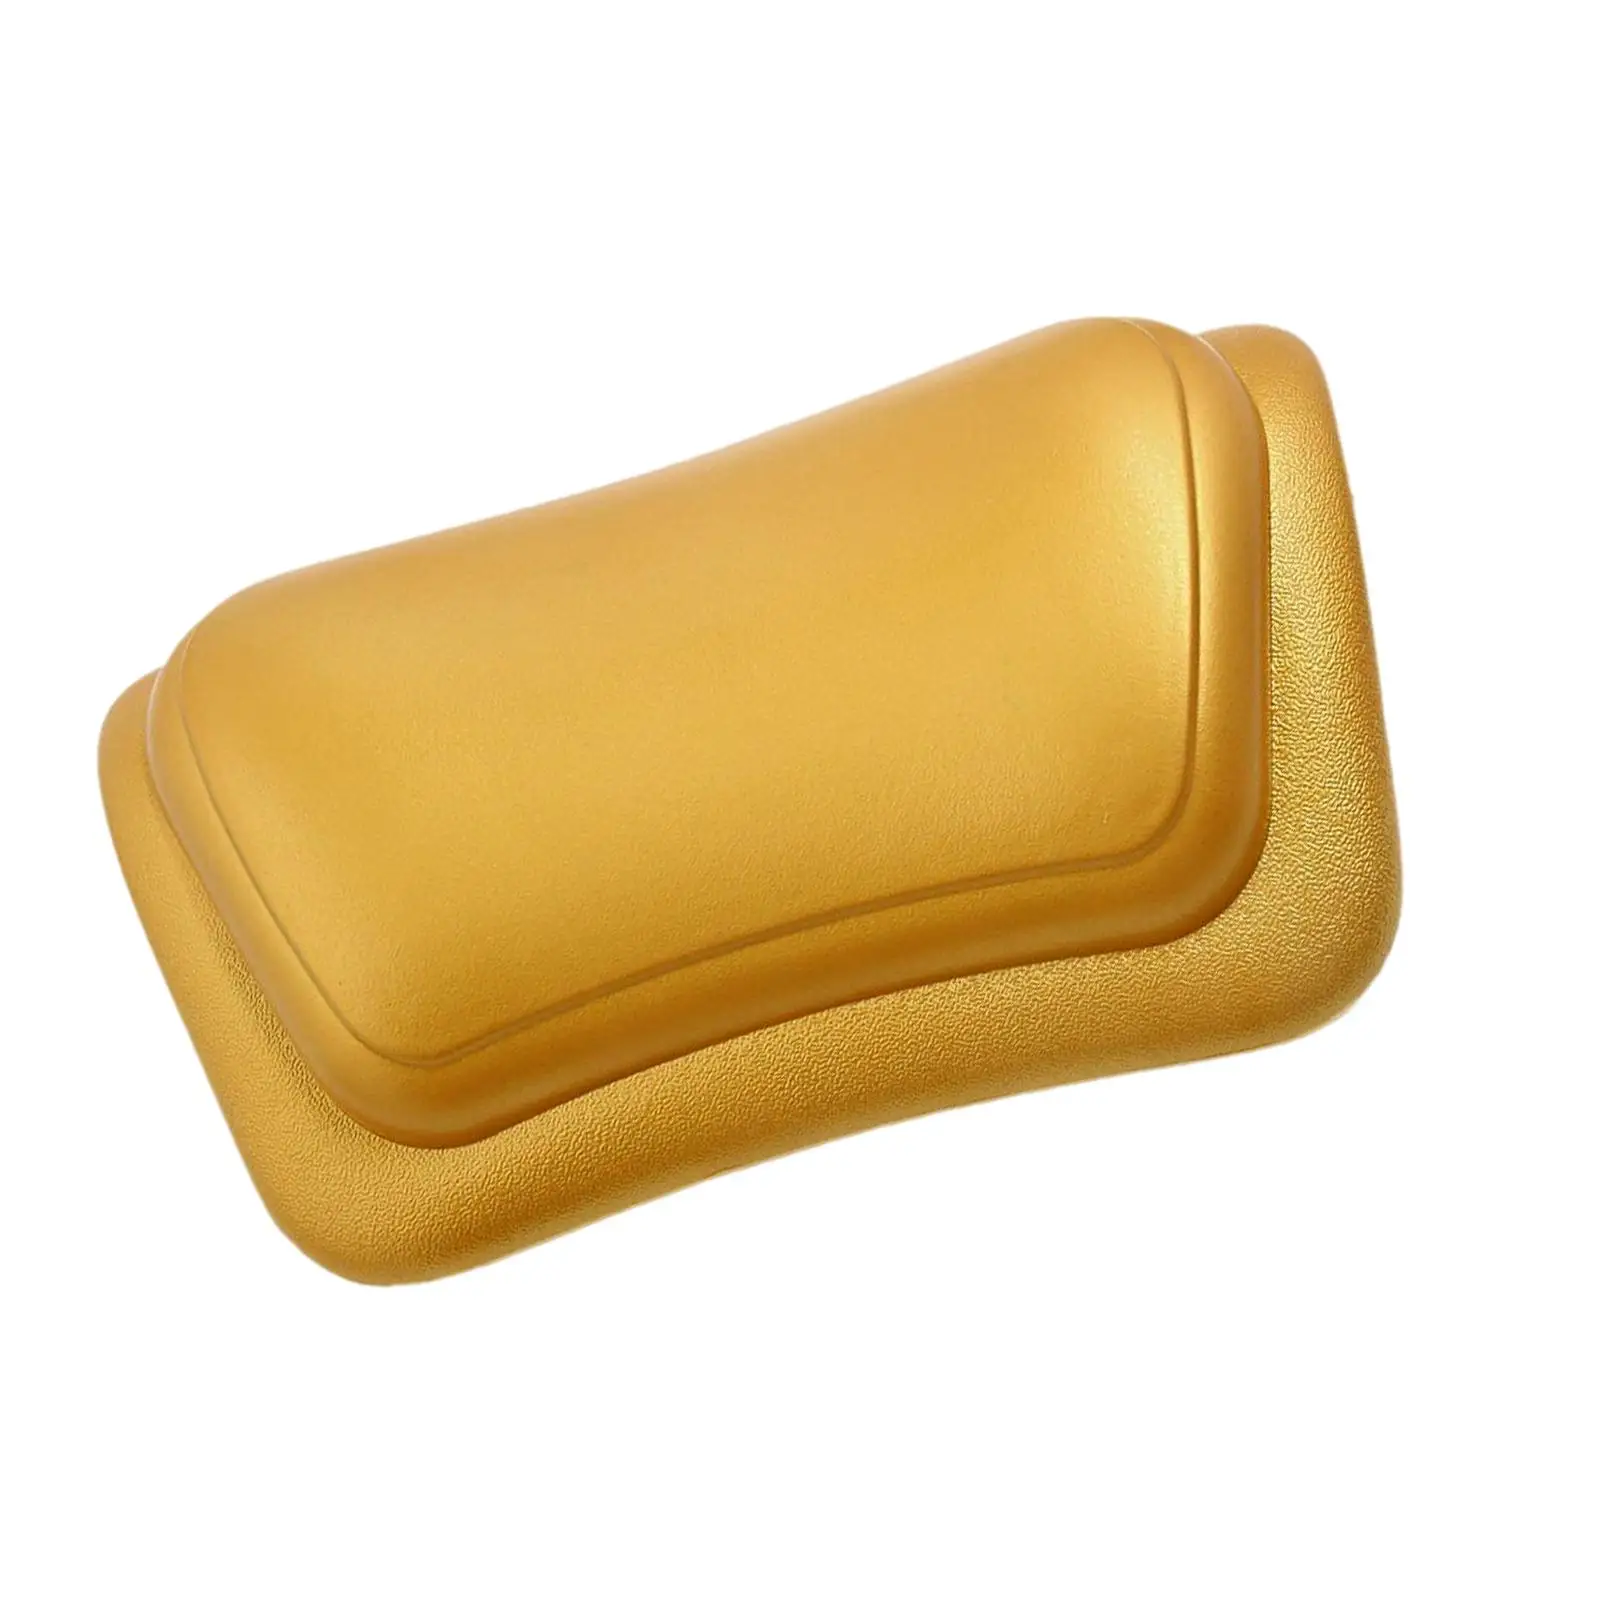 Bath Pillow Head Neck Support Strong Suction Pillow Easy to Clean Shoulder Pillows for Hotel